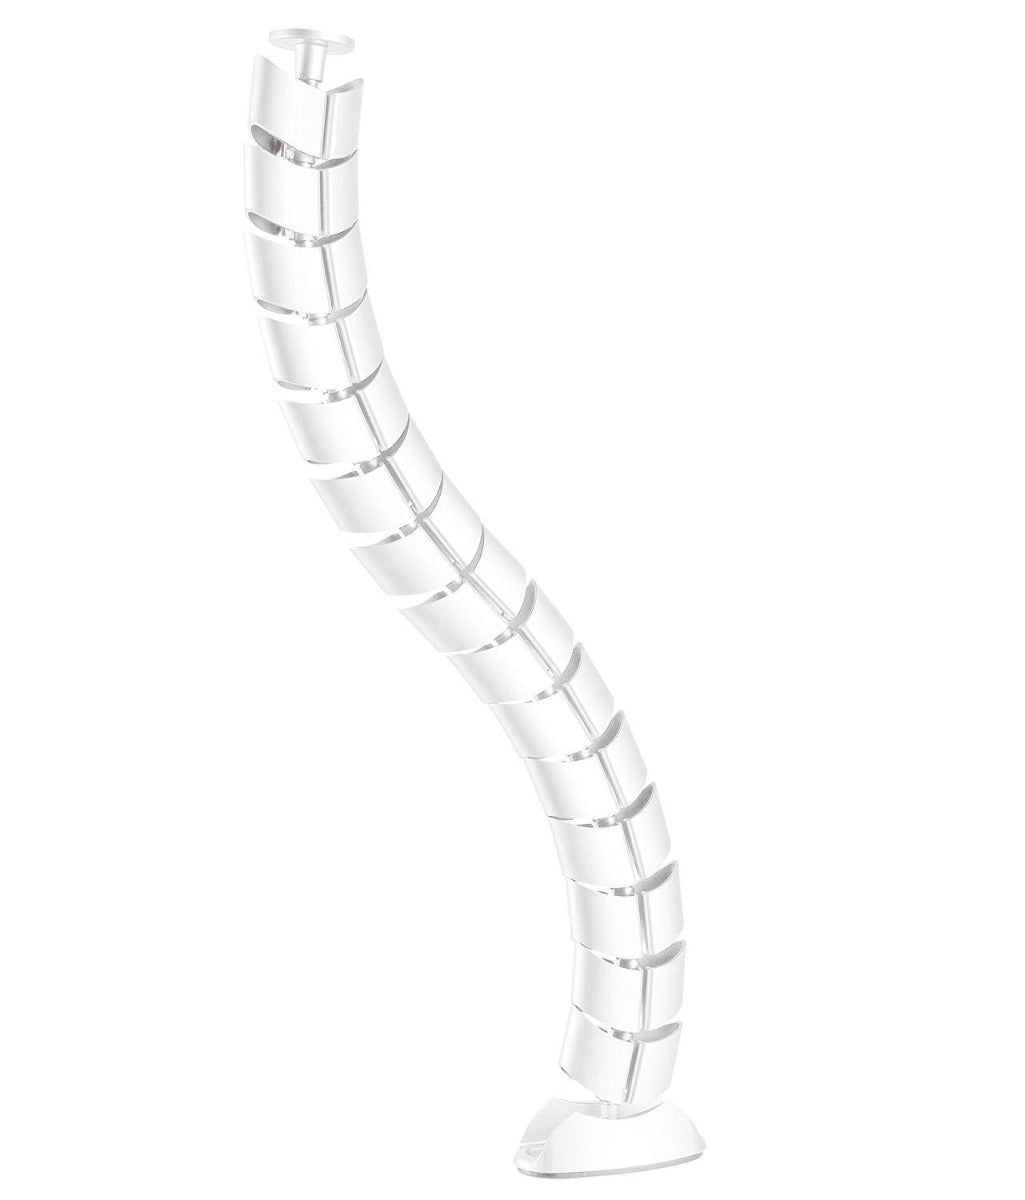 Cable Management Spine in White - OOF-P09